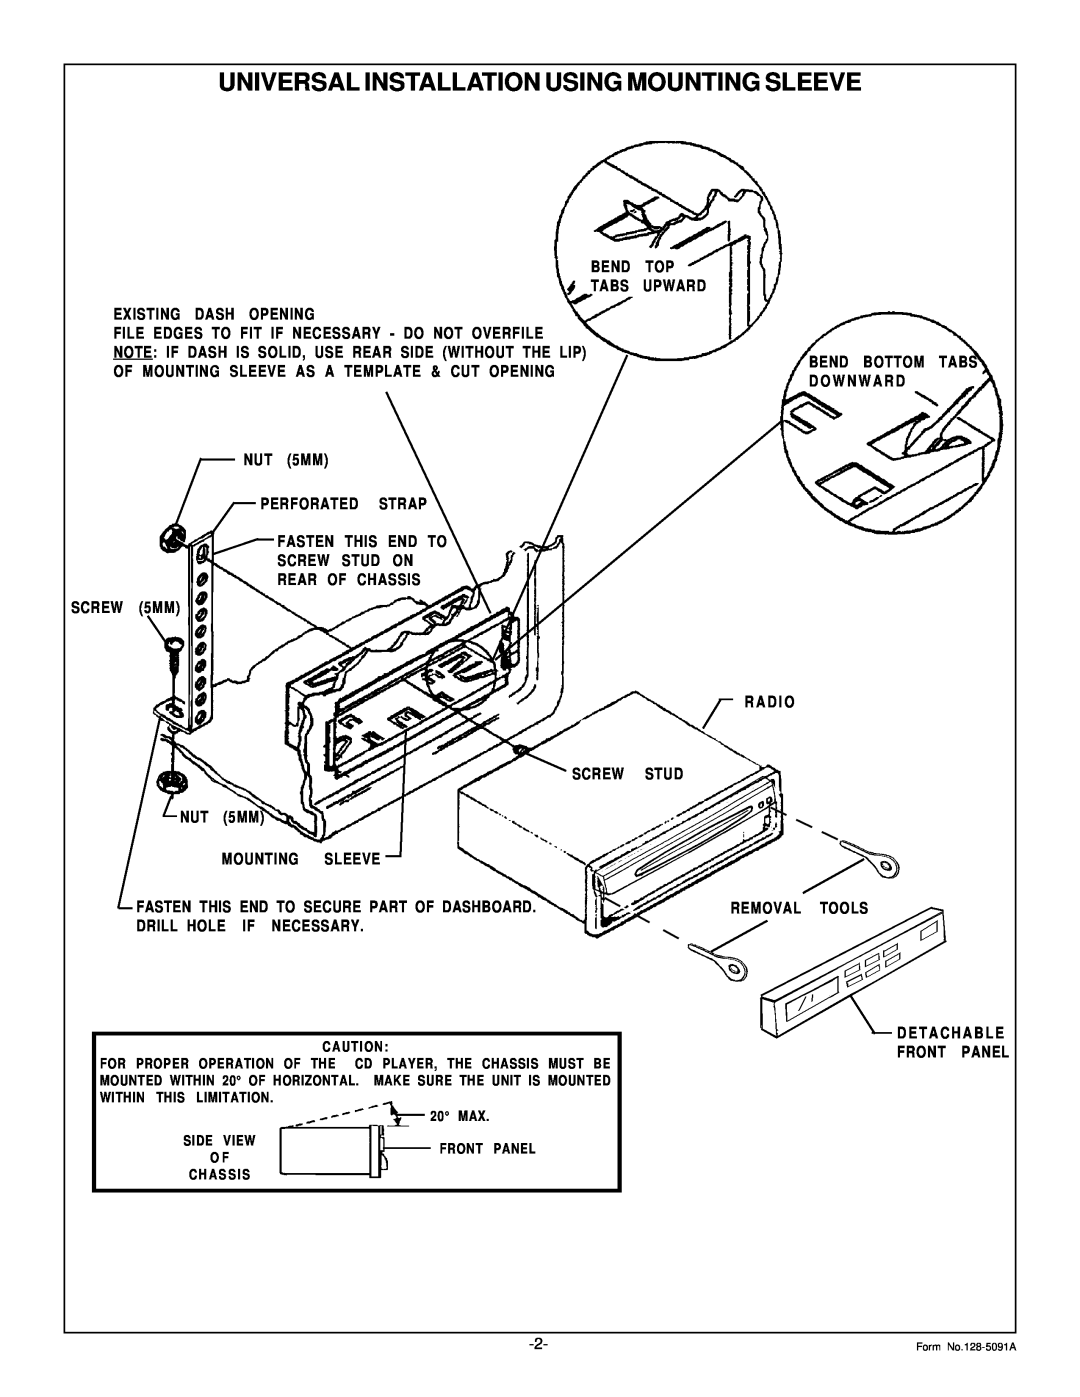 Audiovox Car Stereo System installation instructions Universal Installation Using Mounting Sleeve 